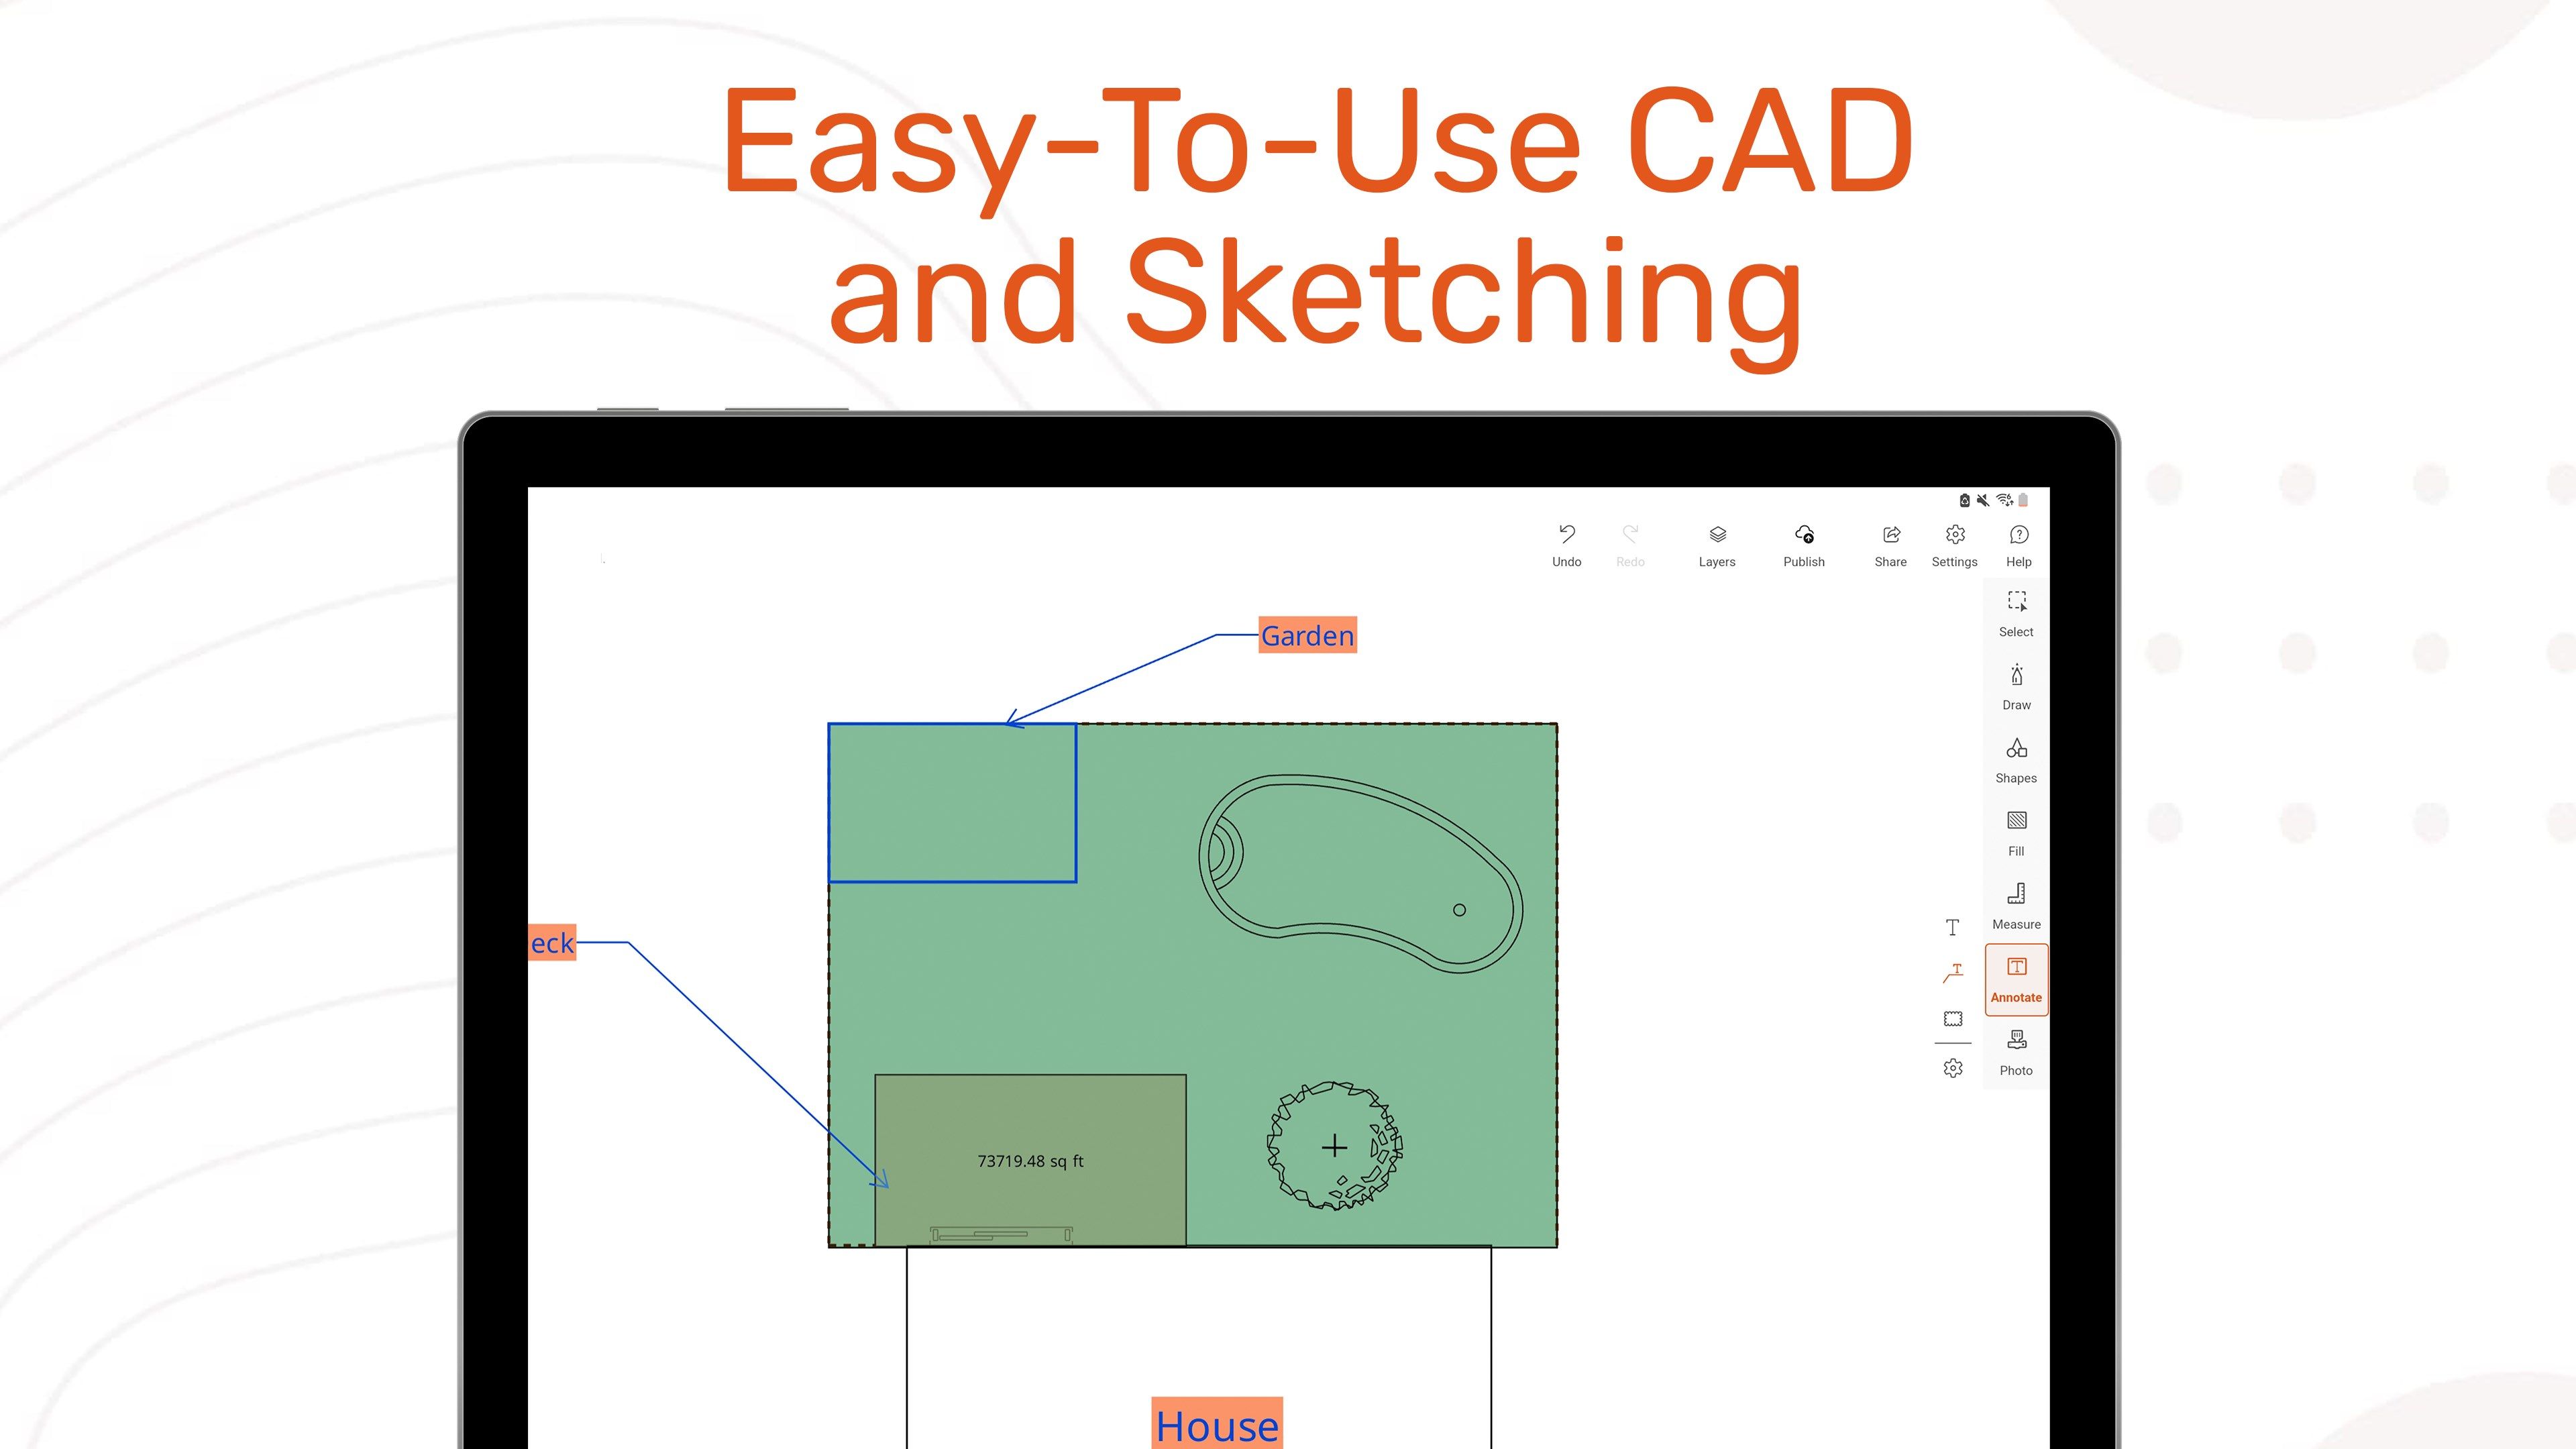 Easy-To-Use CAD and Sketching